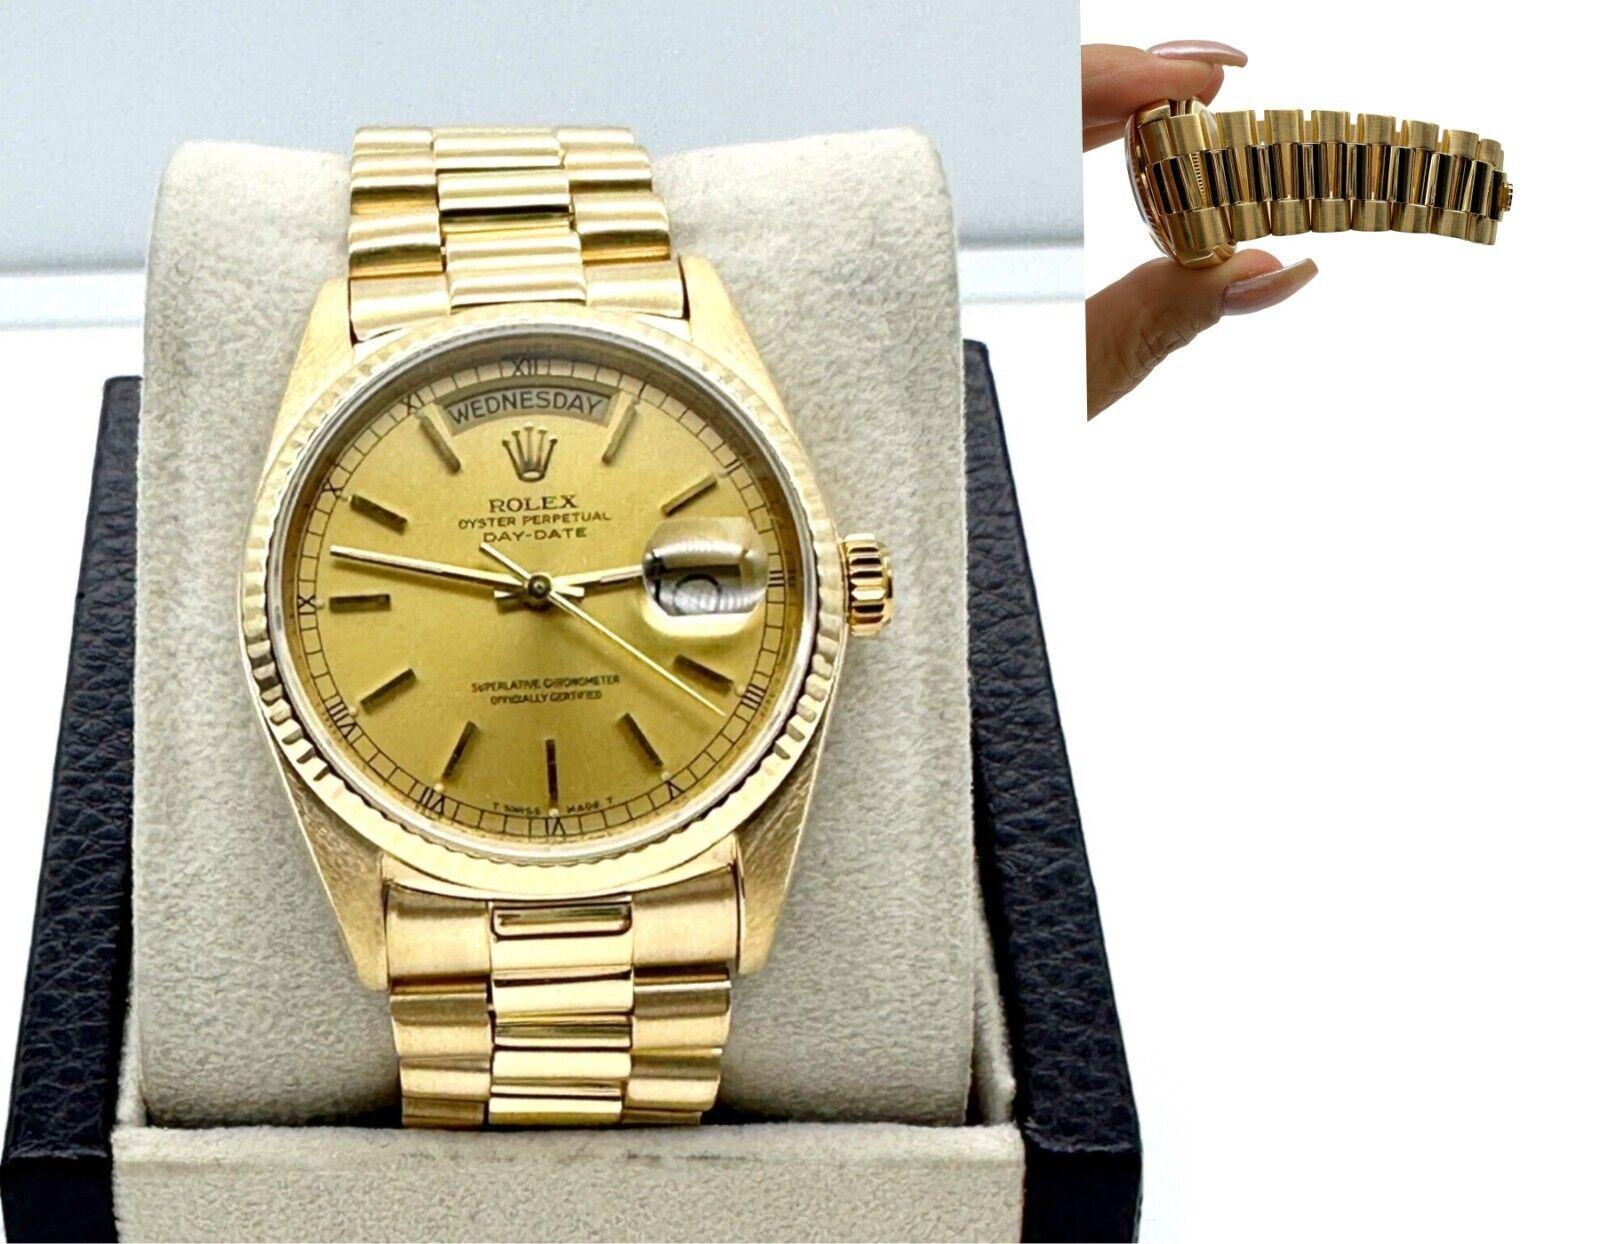 Style Number: 18038

Serial: 9142***

Year: 1986

Model: President Day Date

Case Material: 18K Yellow Gold 

Band: 18K Yellow Gold 

Bezel: 18K Yellow Gold 
 
Dial: Champagne  

Face: Sapphire Crystal  

Case Size: 36mm 

Includes: 

-Rolex